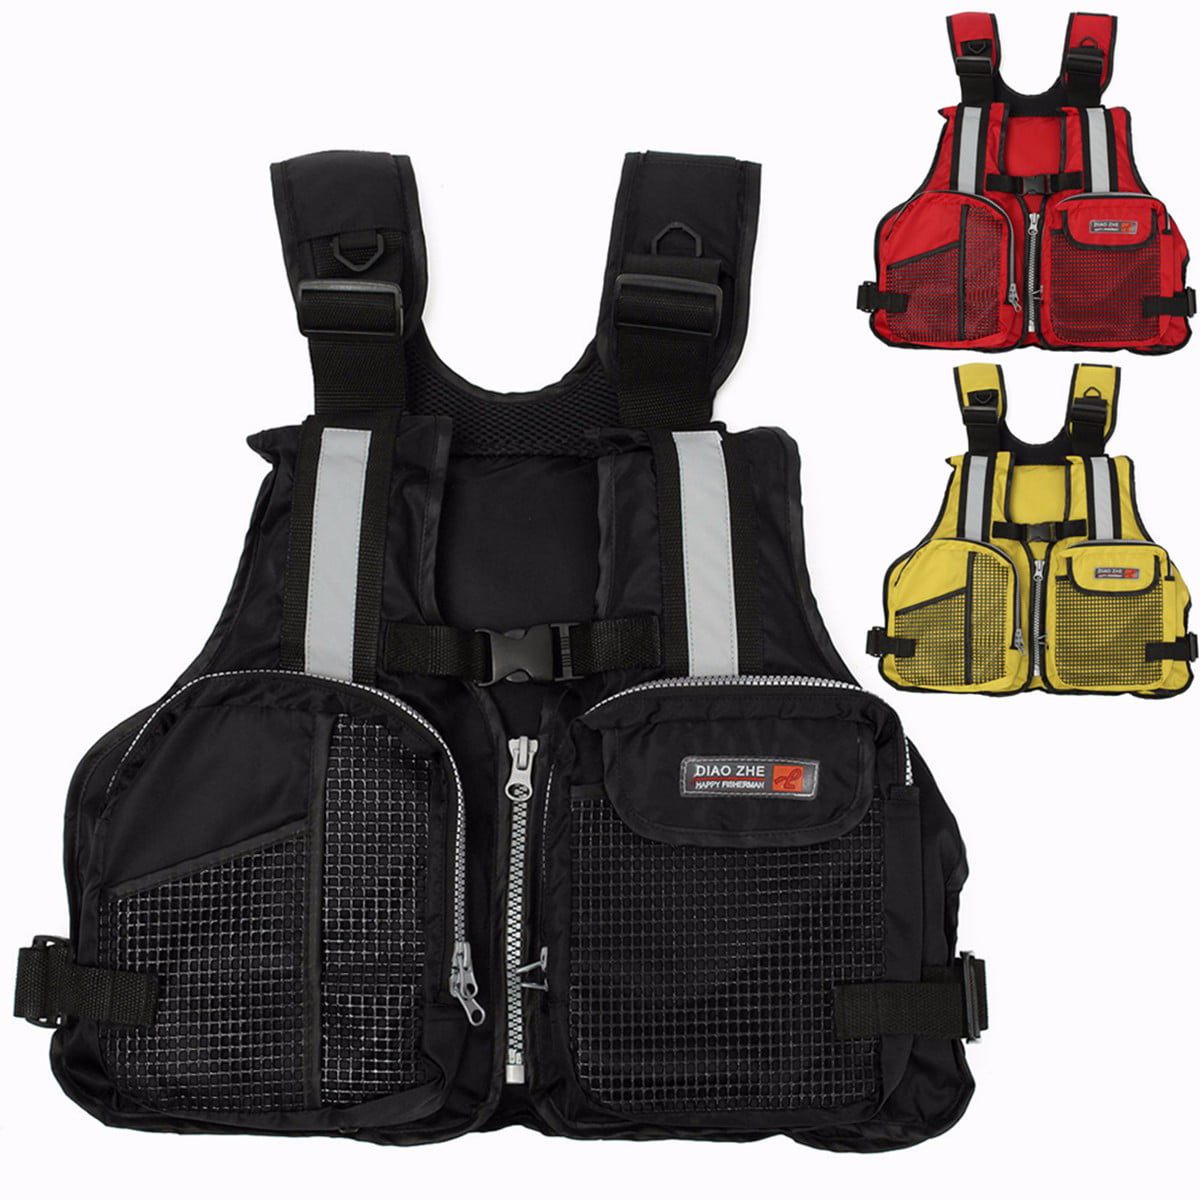 Details about   Adult Kid Safety Life Jacket Aid Sailing Boating Swimming Kayak Fishing Vest 